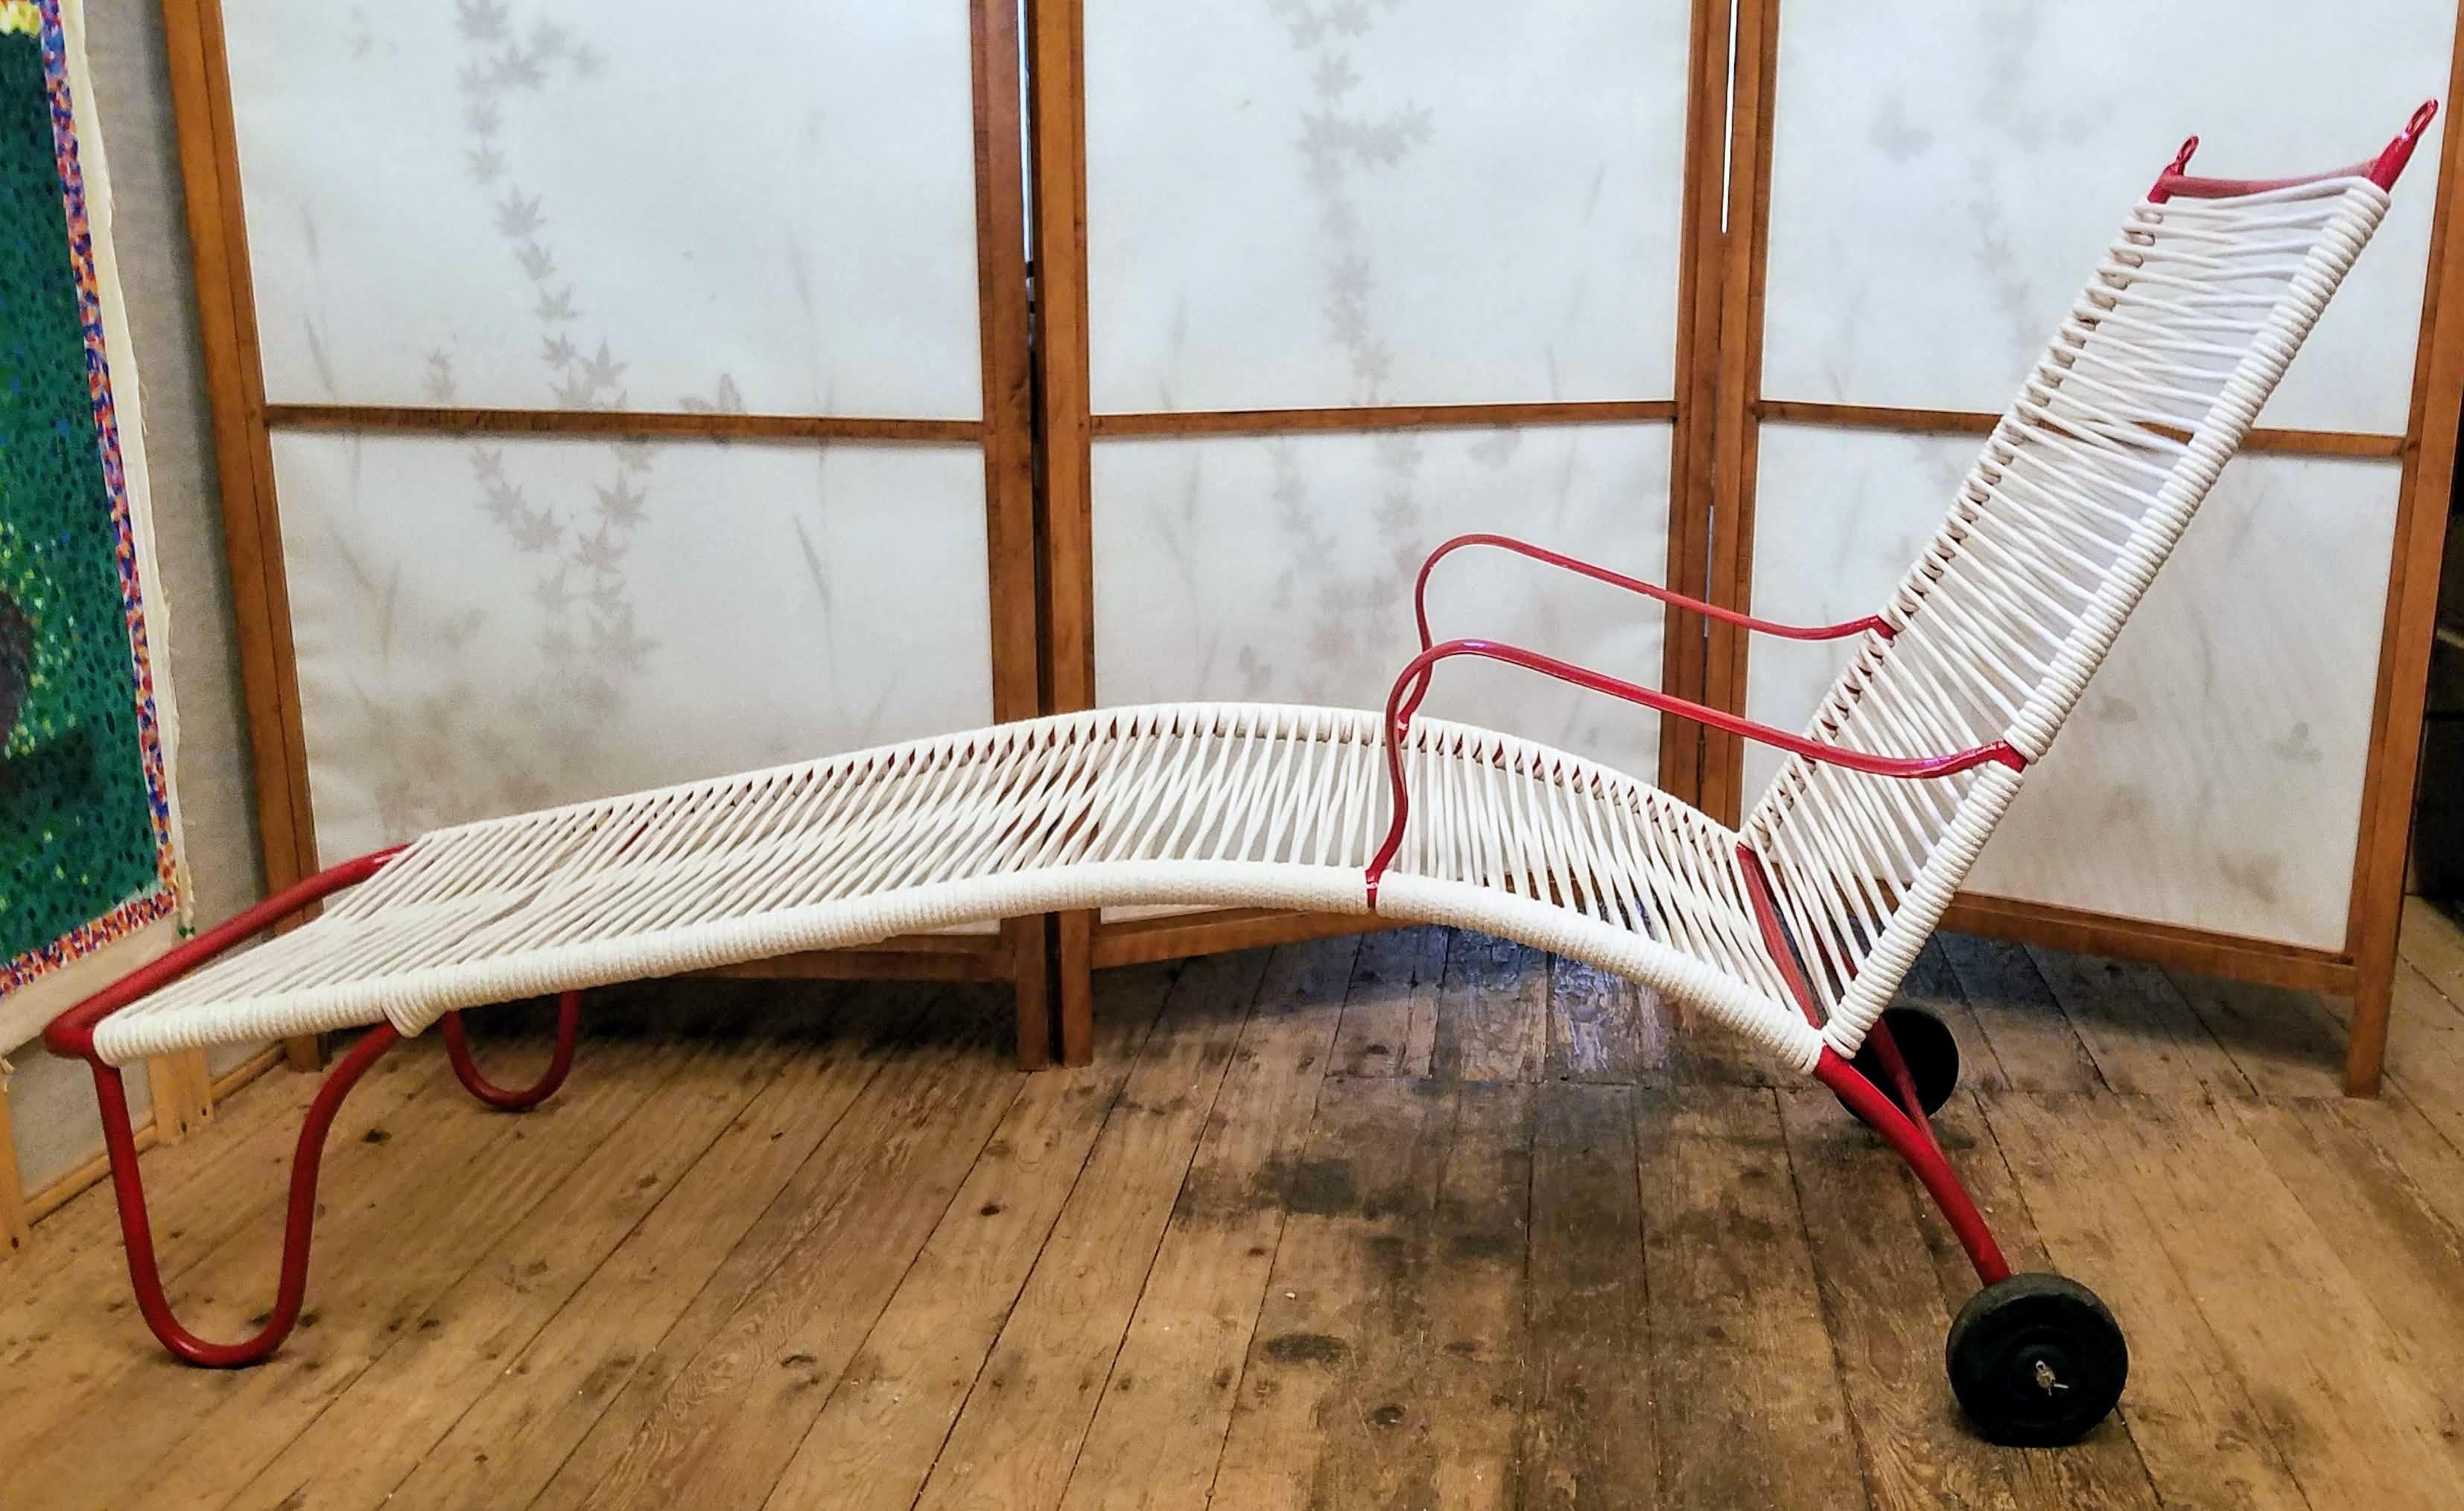 A rare Robert Lewis chaise lounge hand crafted at his studio below the Old Mission Santa Barbara in Santa Barbara, California. 
He and his assistants produced an impressive catalog of great outdoor furniture in wrought iron, steel pipe and copper